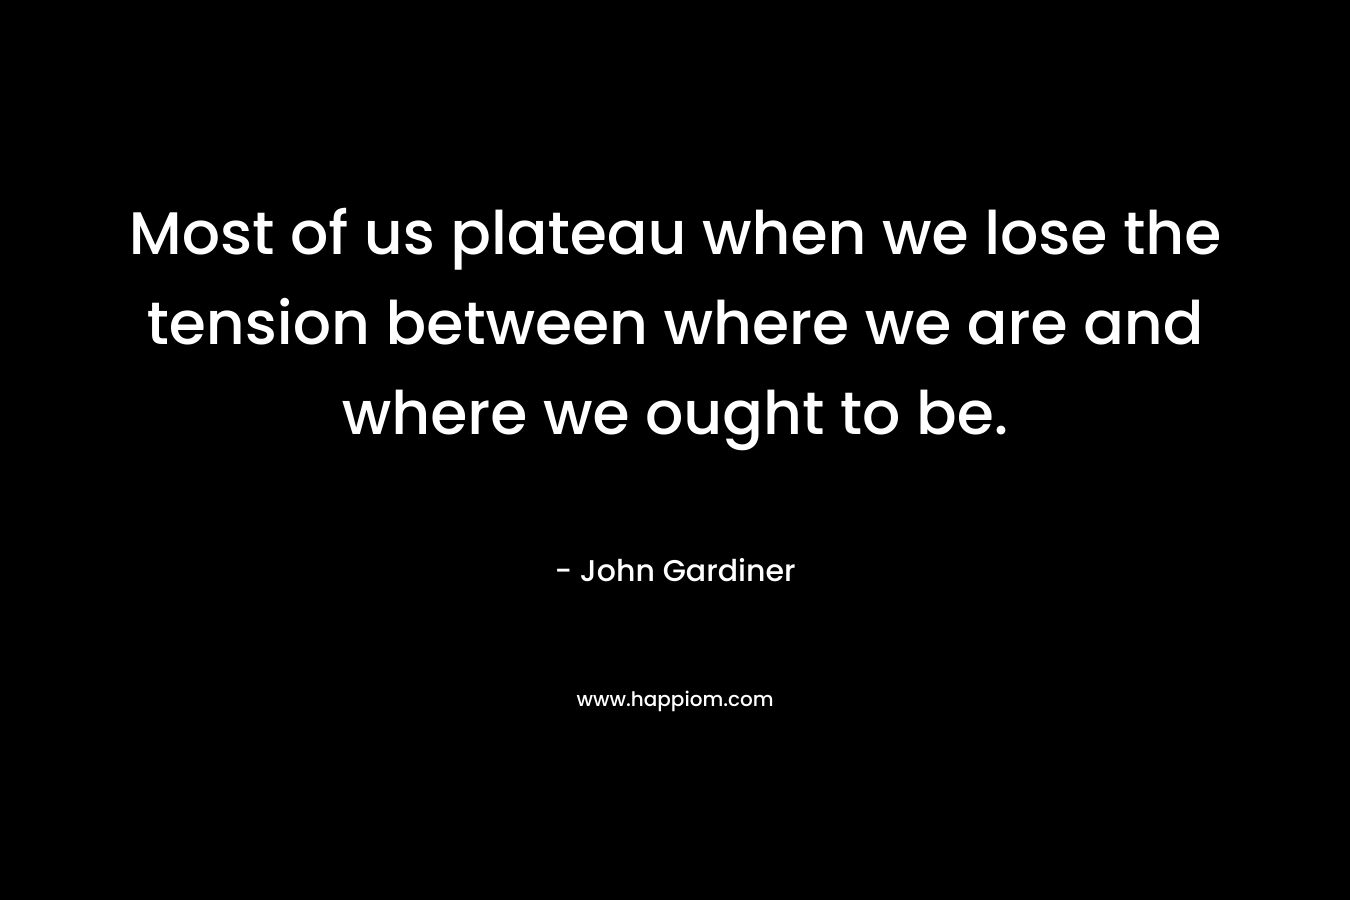 Most of us plateau when we lose the tension between where we are and where we ought to be.